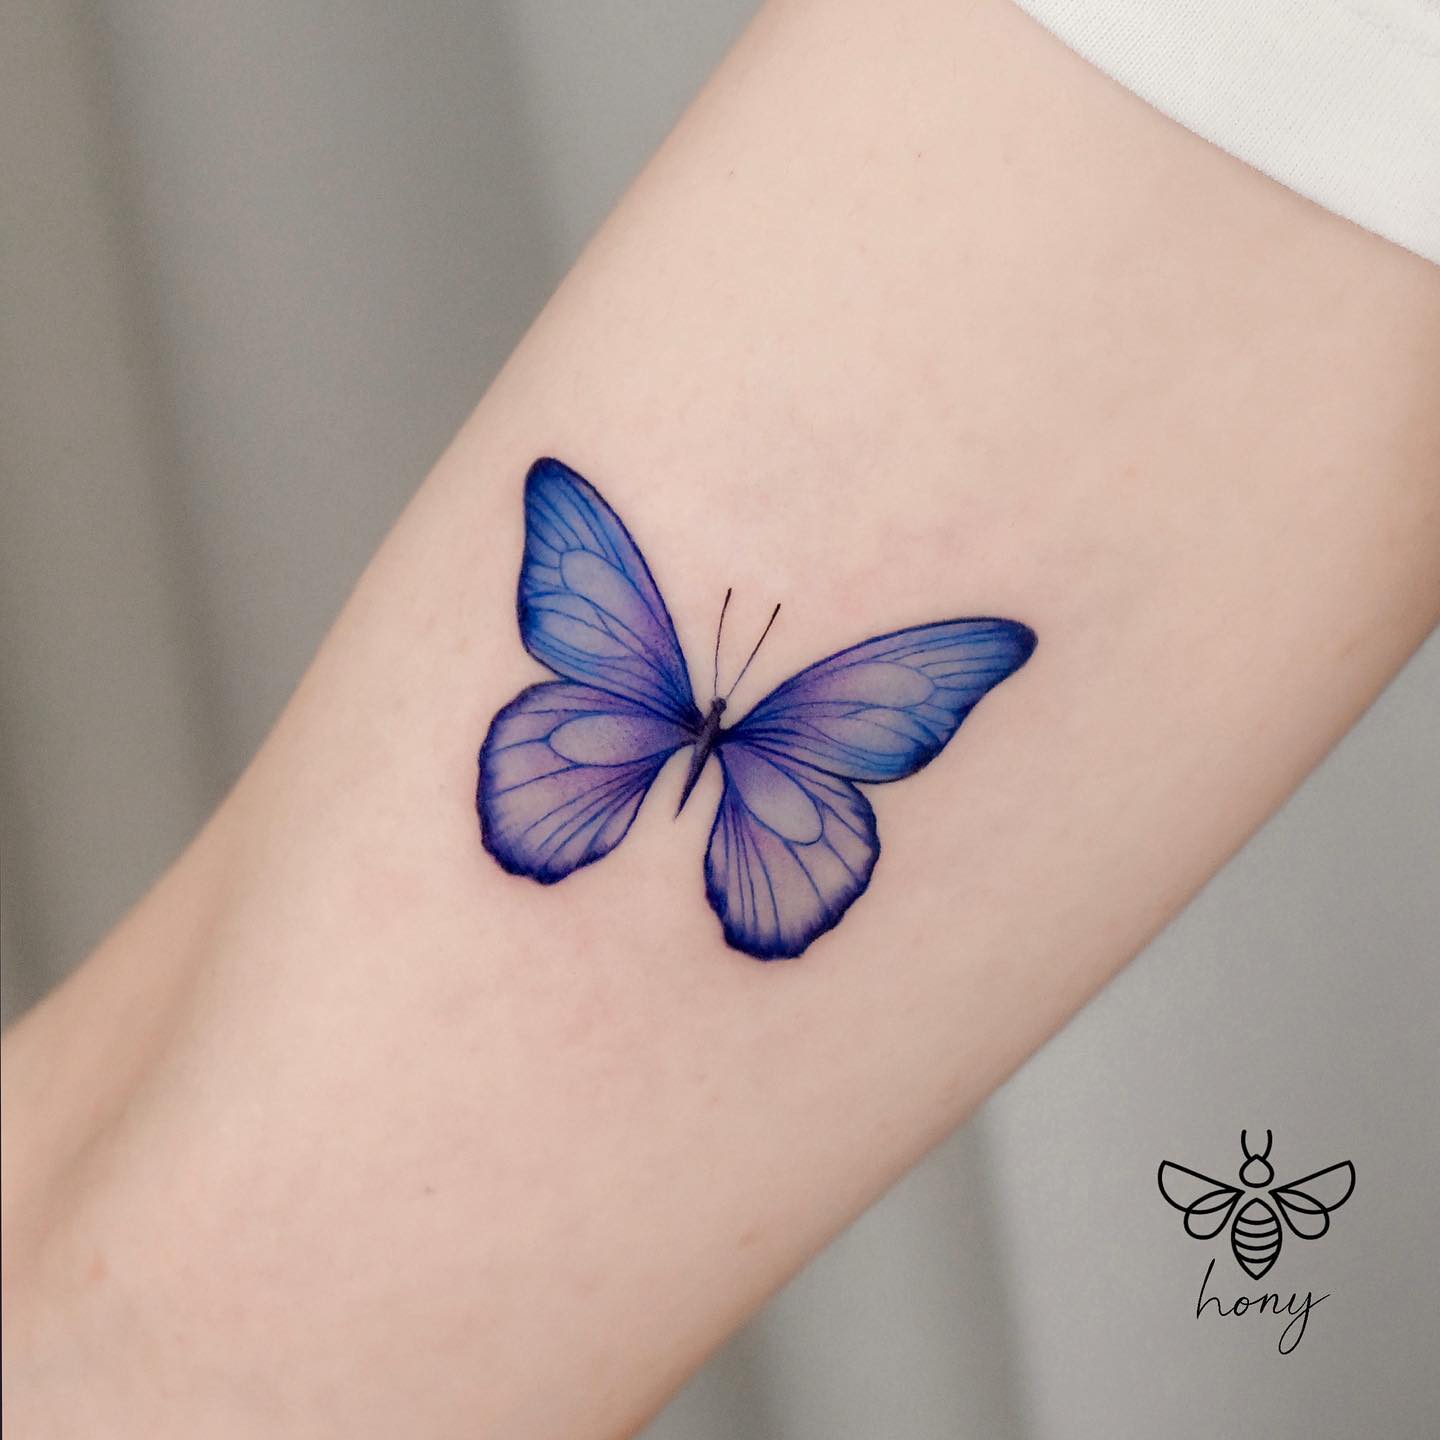 Butterfly tattoo design by hony tattoo